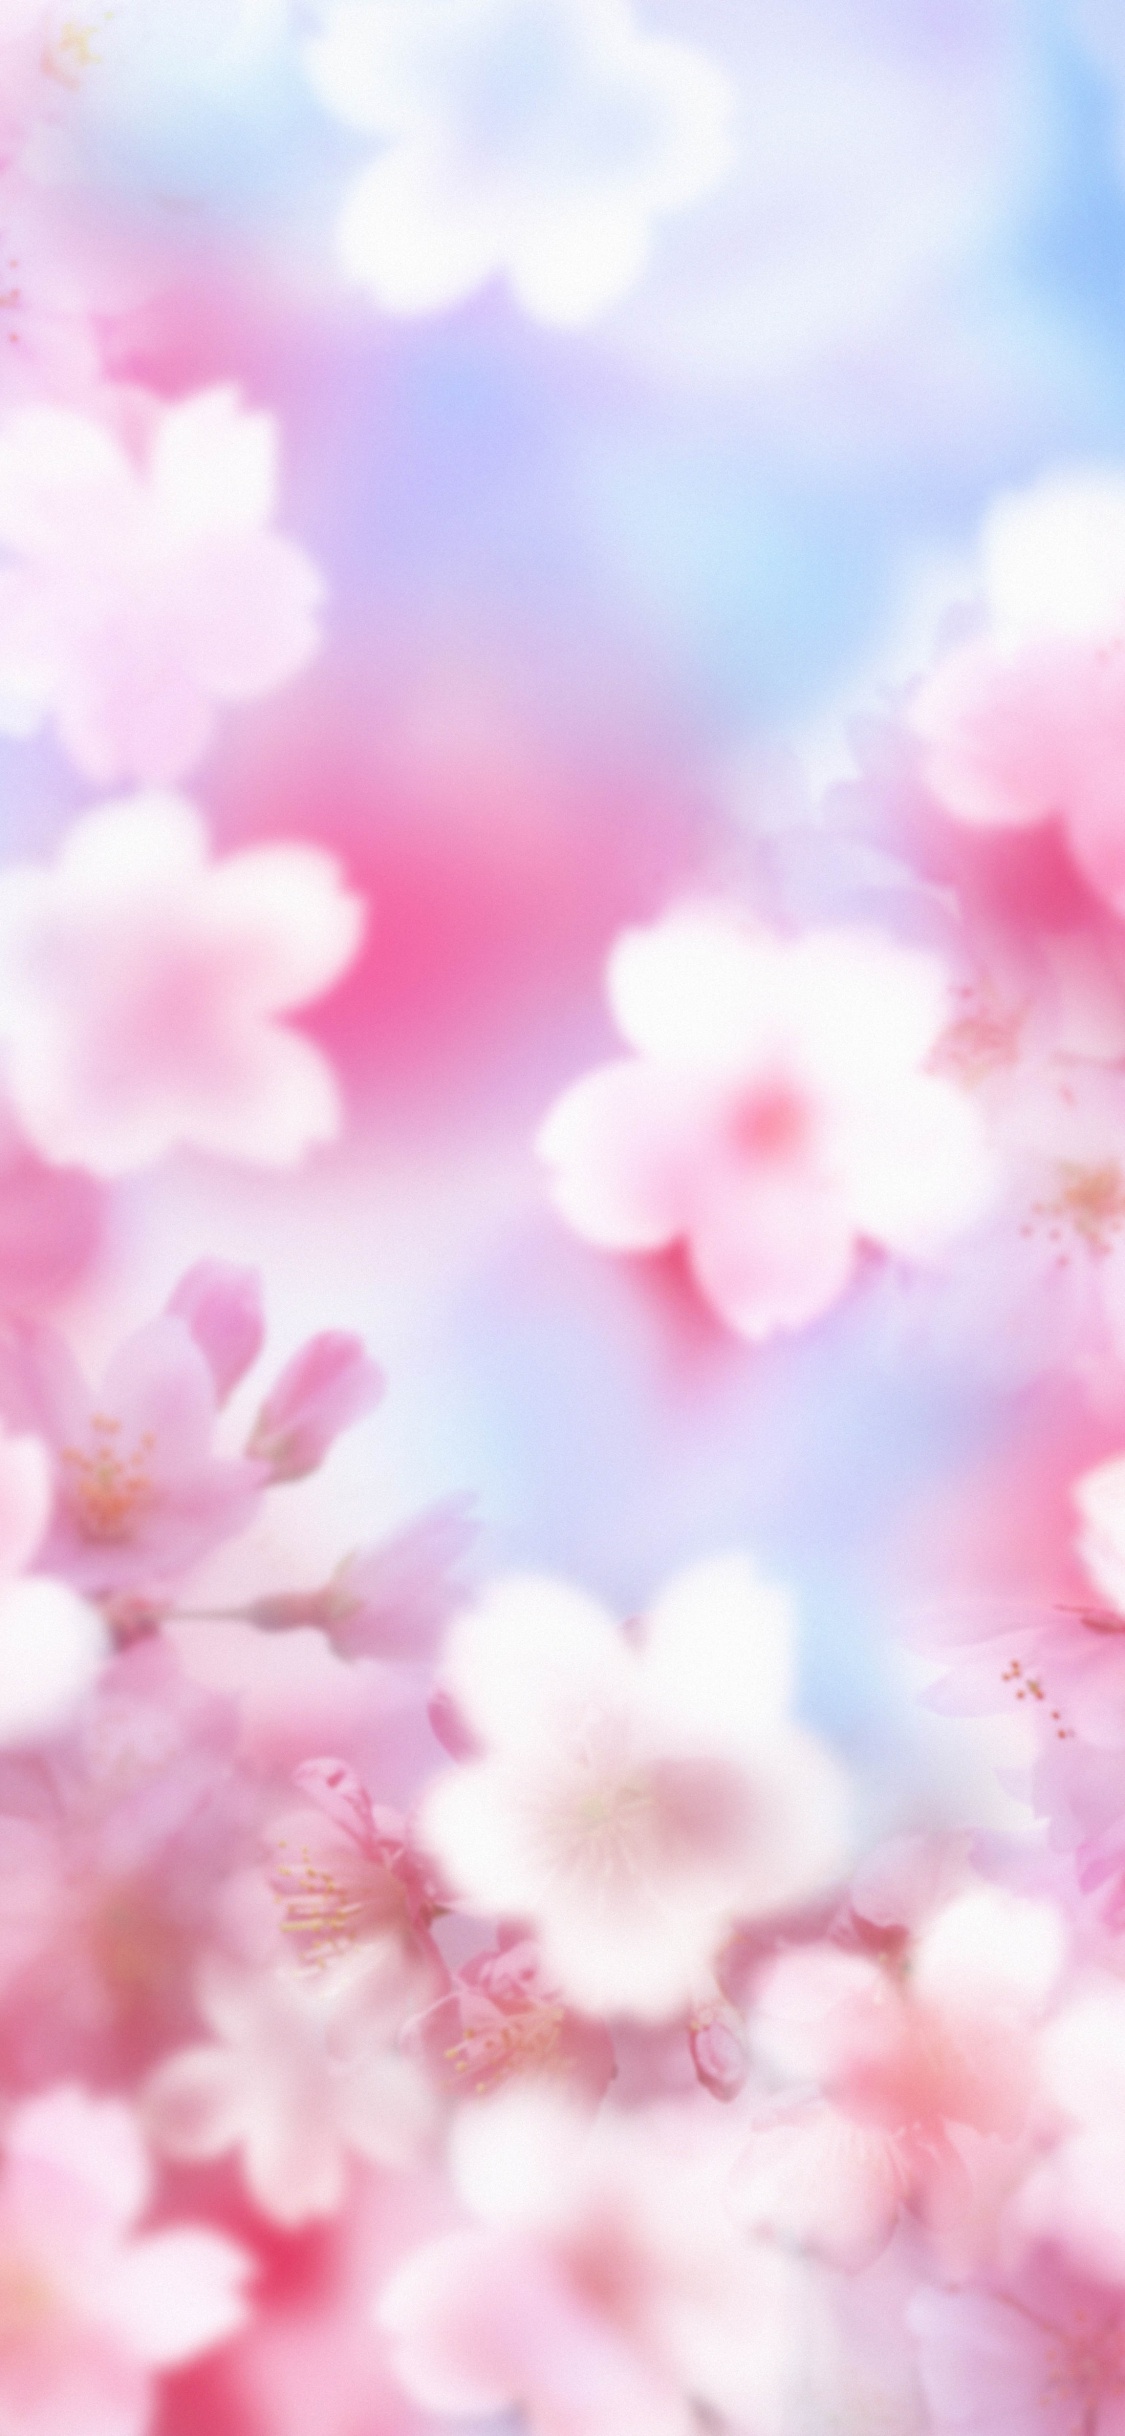 Pink Cherry Blossom Under Blue Sky During Daytime. Wallpaper in 1125x2436 Resolution